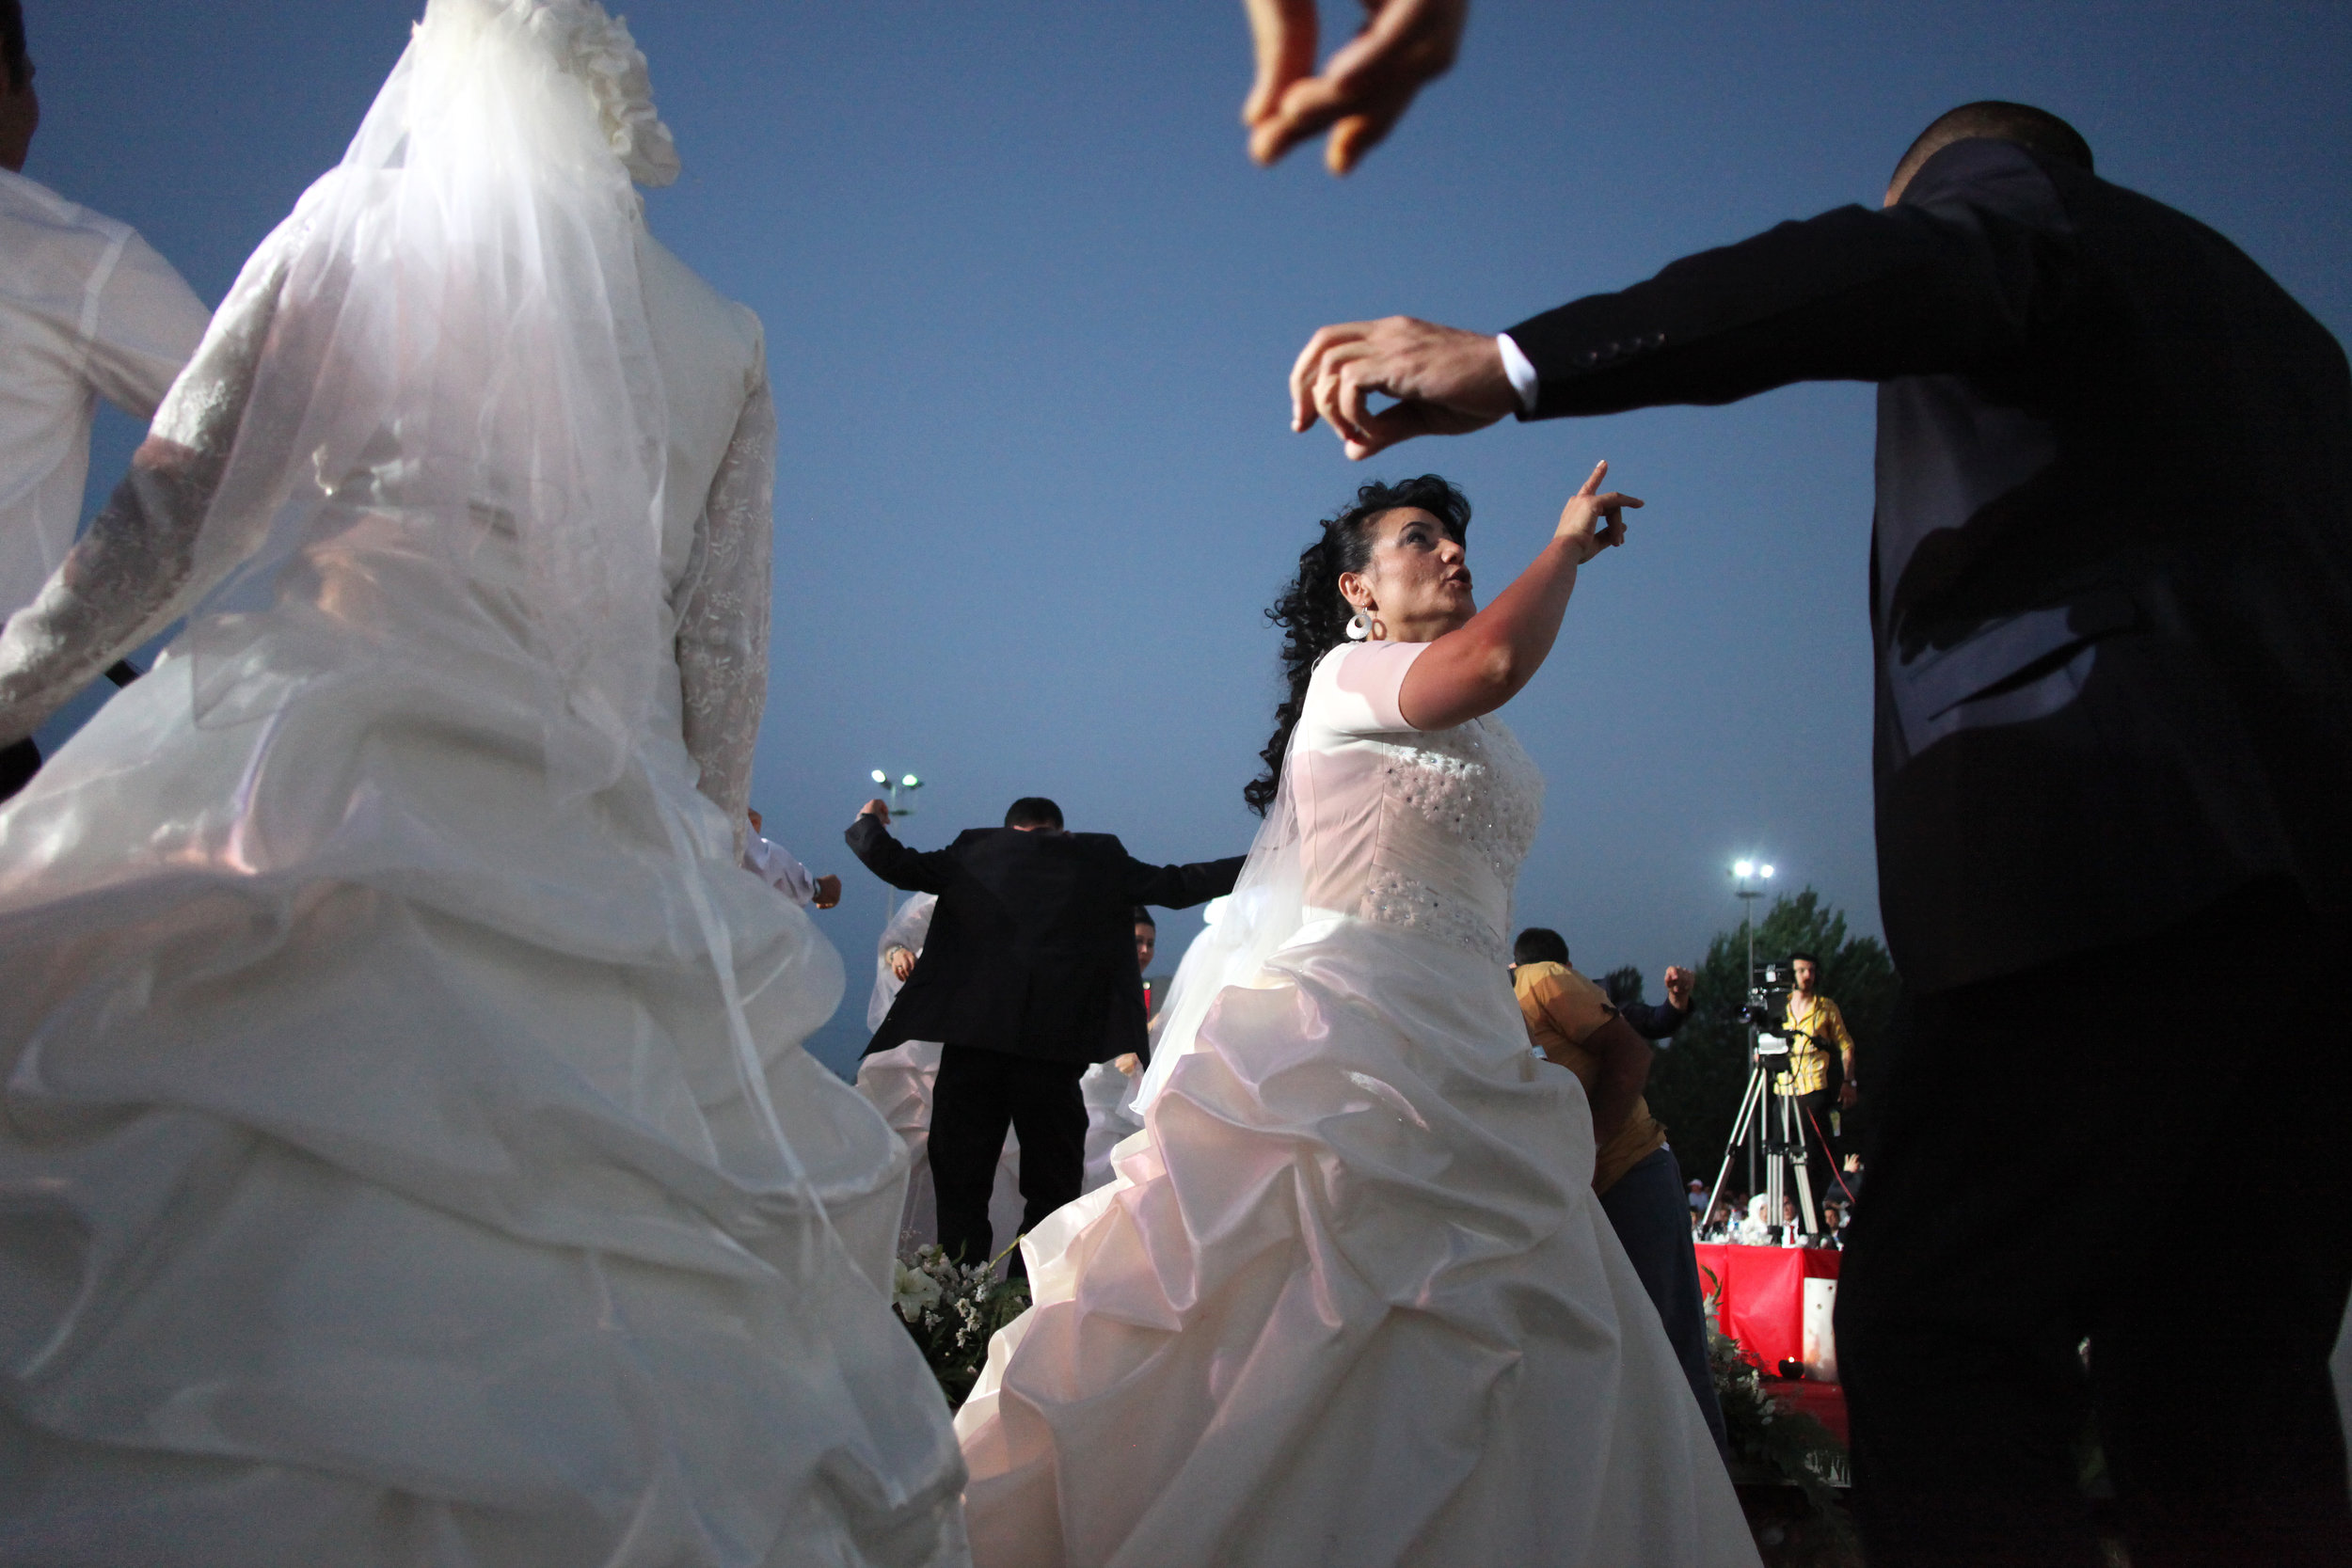  Couples dance during a wedding festival which the Ankara Buyuksehir Municipality organizes annually to help low-income families on June 29, 2013 in Ankara, Turkey. This year 213 couples participated in this community wedding.     